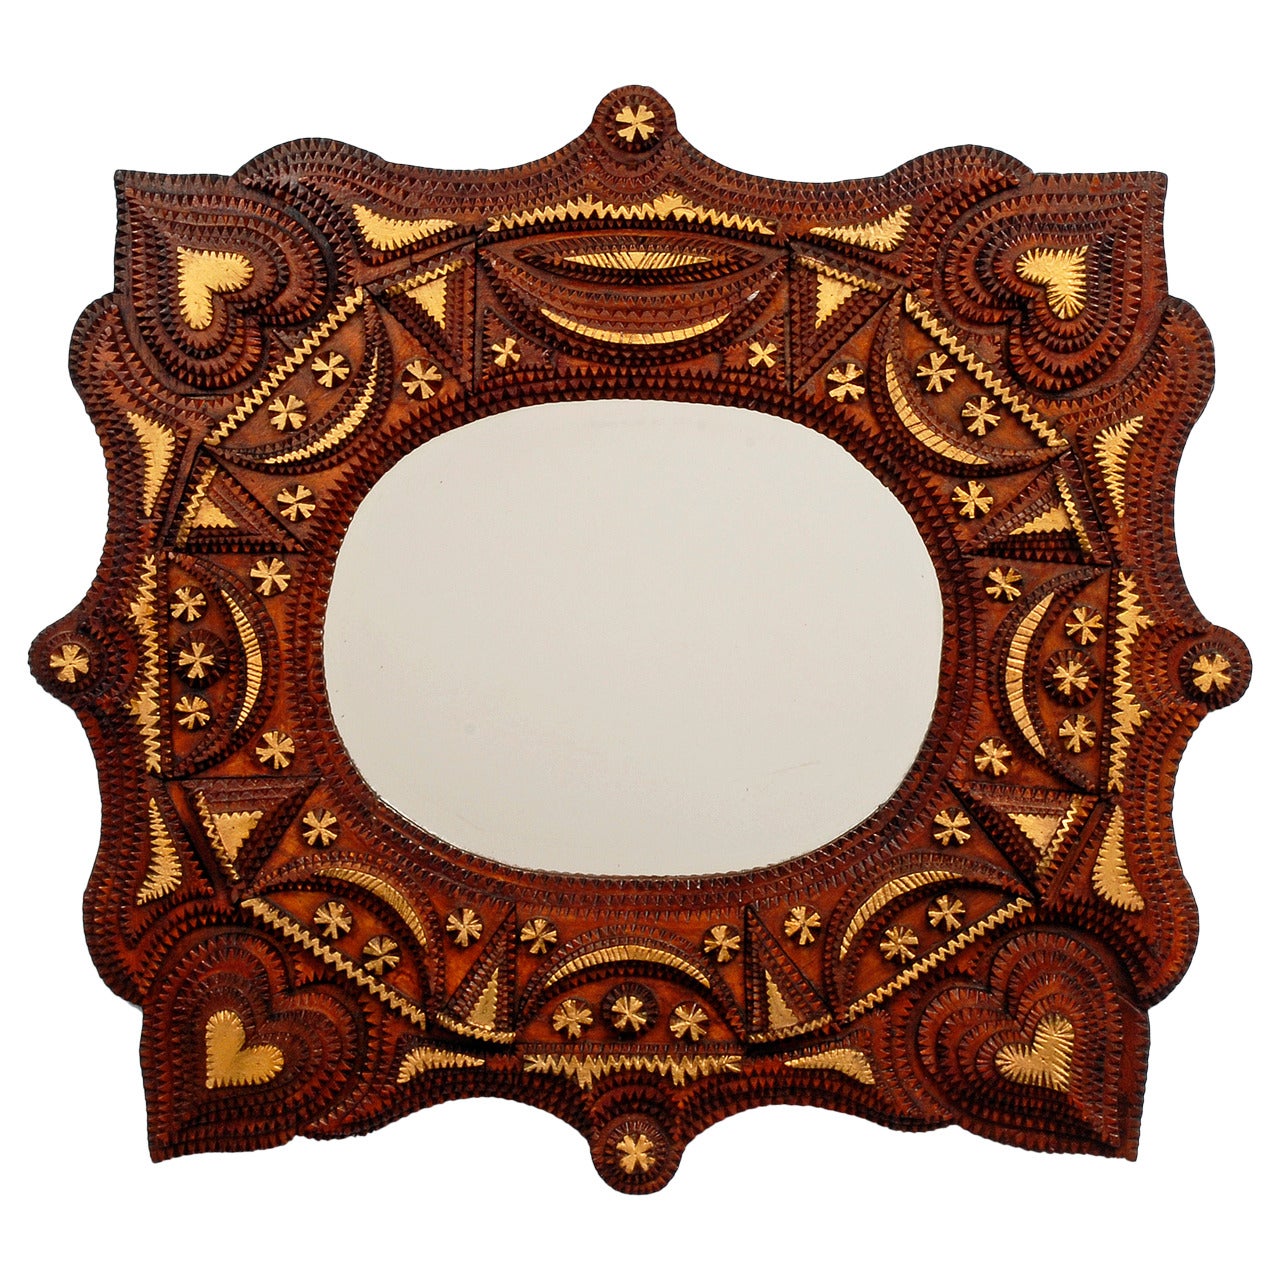 Superb Tramp Art Mirror with Hearts For Sale